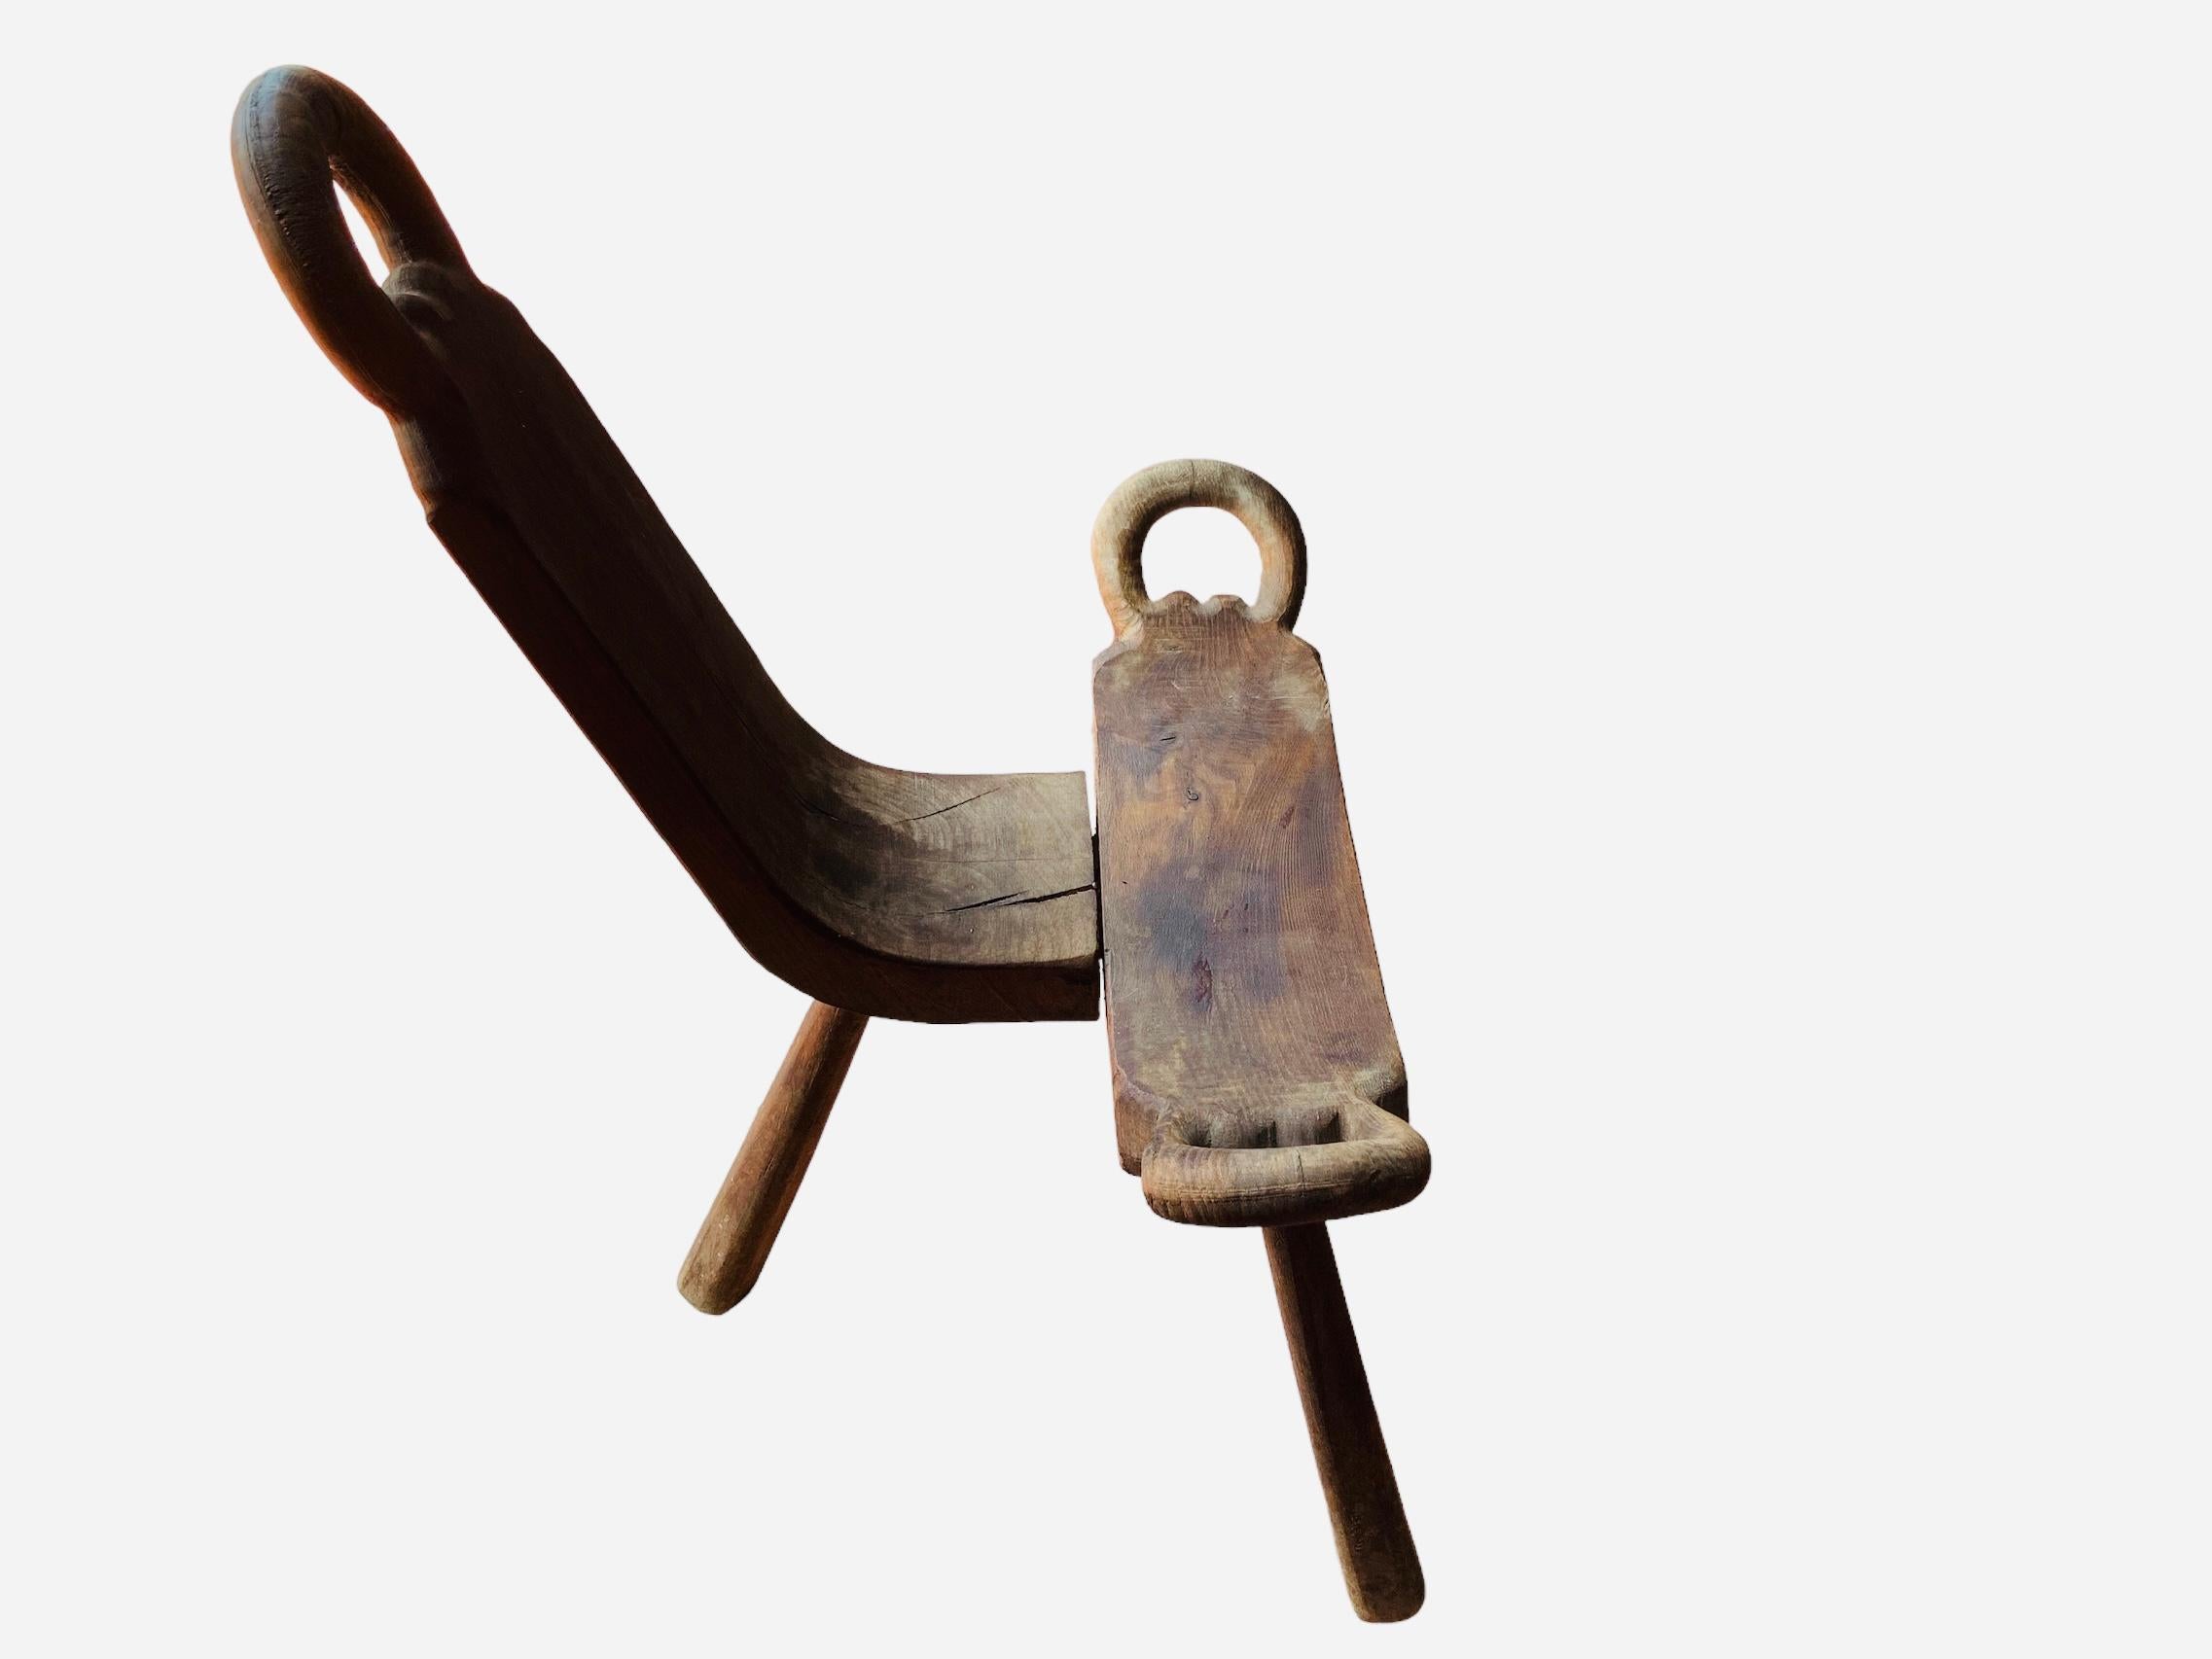 This is a Spaniard Midwife Birthing Tripod Chair/Stool. It is made of solid wood. Its back is concave shaped and adorned at the top with a carved ring. The seat is rectangular like and also adorned with a ring at each side. The chair is supported by